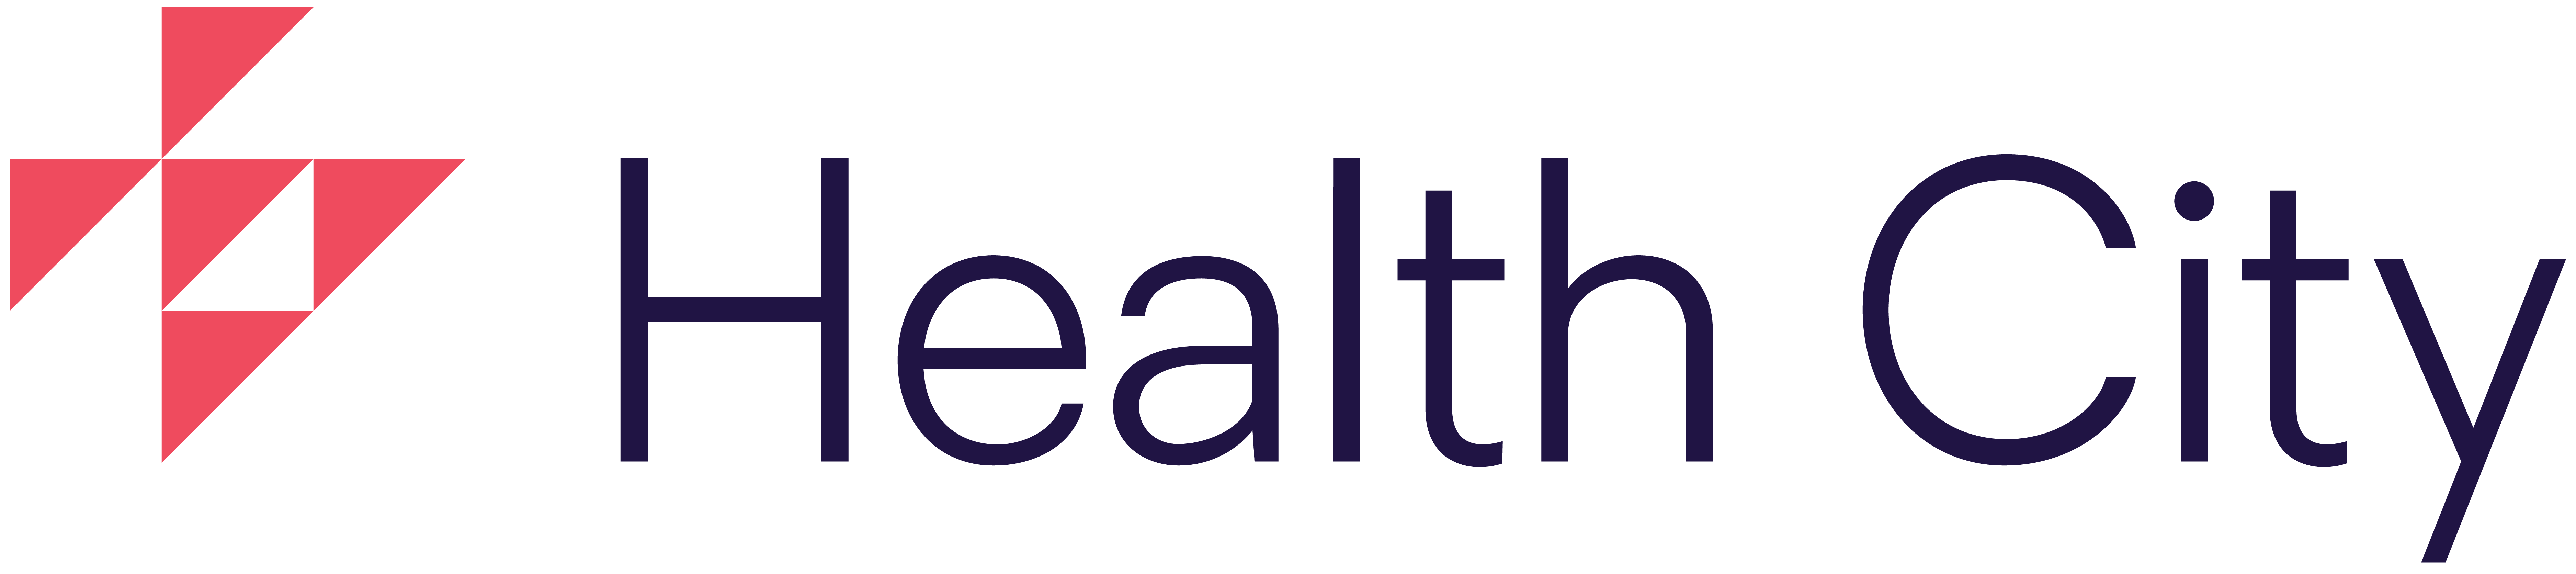 HealthCity_Secondary-FullColour (1).png